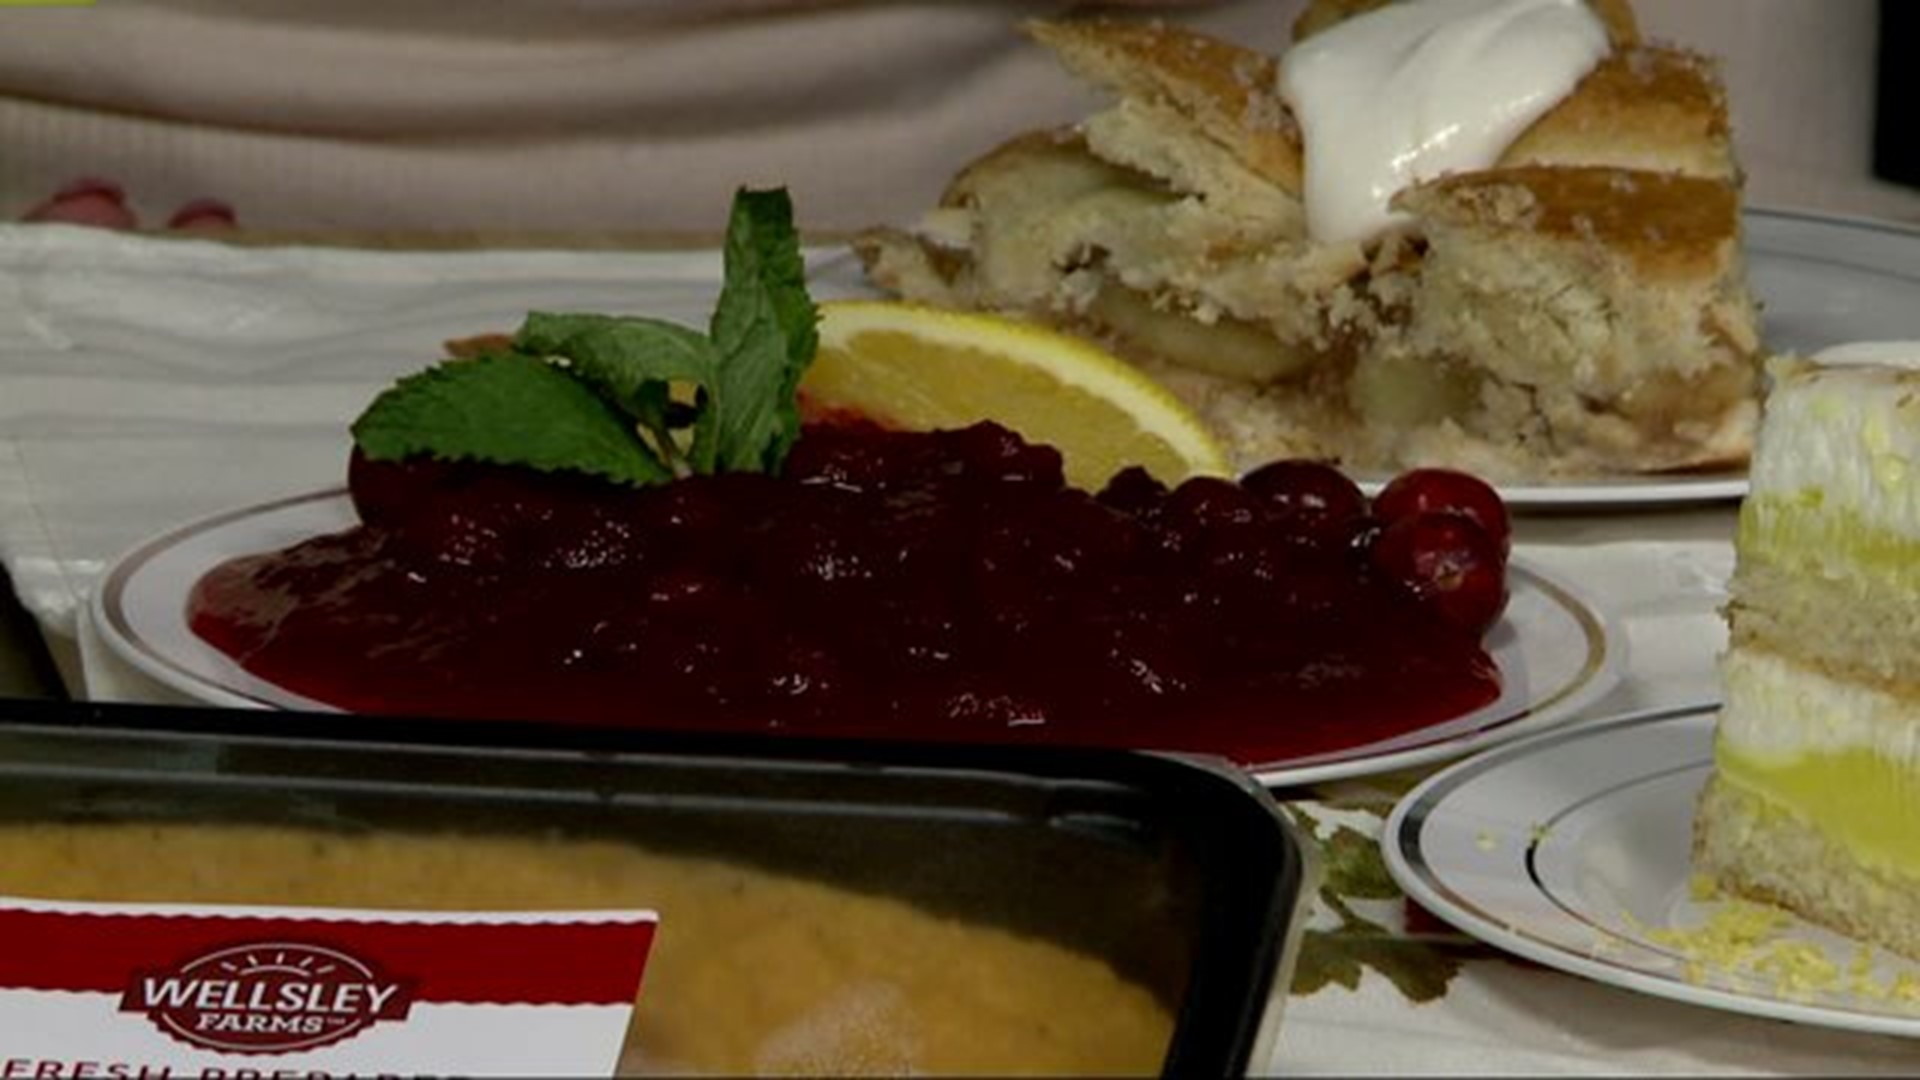 Scrumptious Sides to Spruce Up the Holiday Table